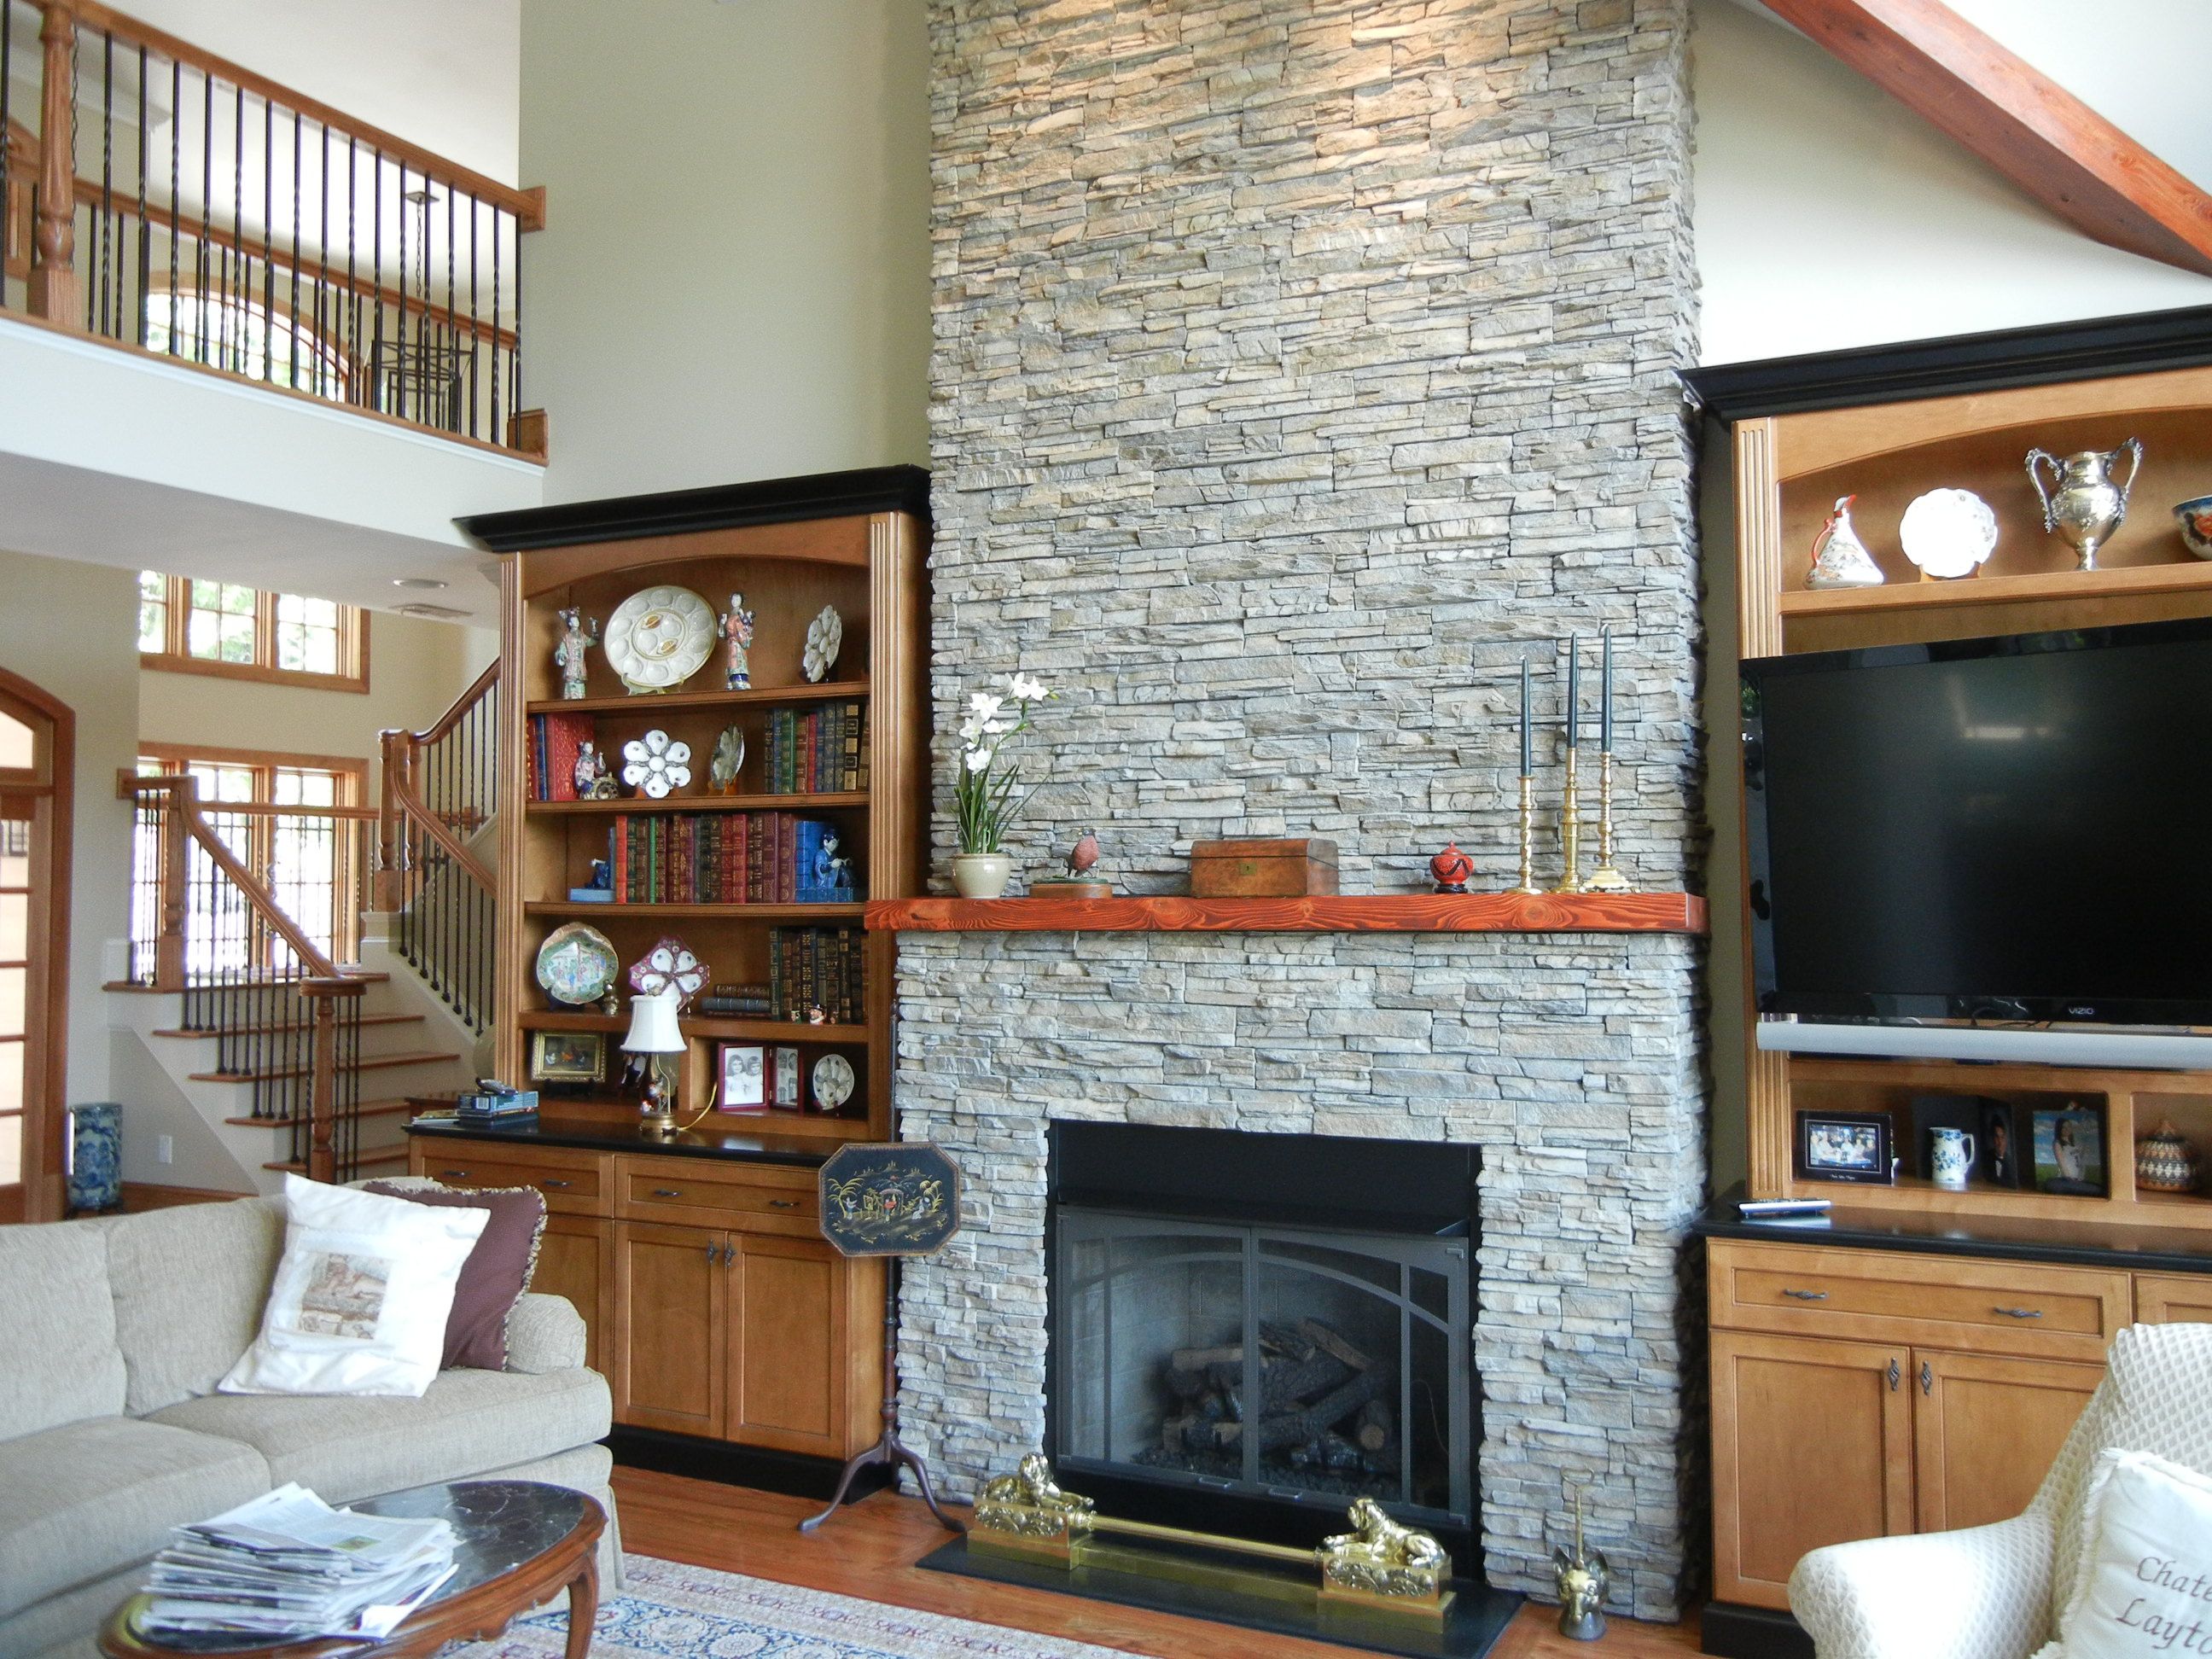 Stone On Fireplace Unique Stone Fireplace Surrounded by Built In Bookshelves Creates A